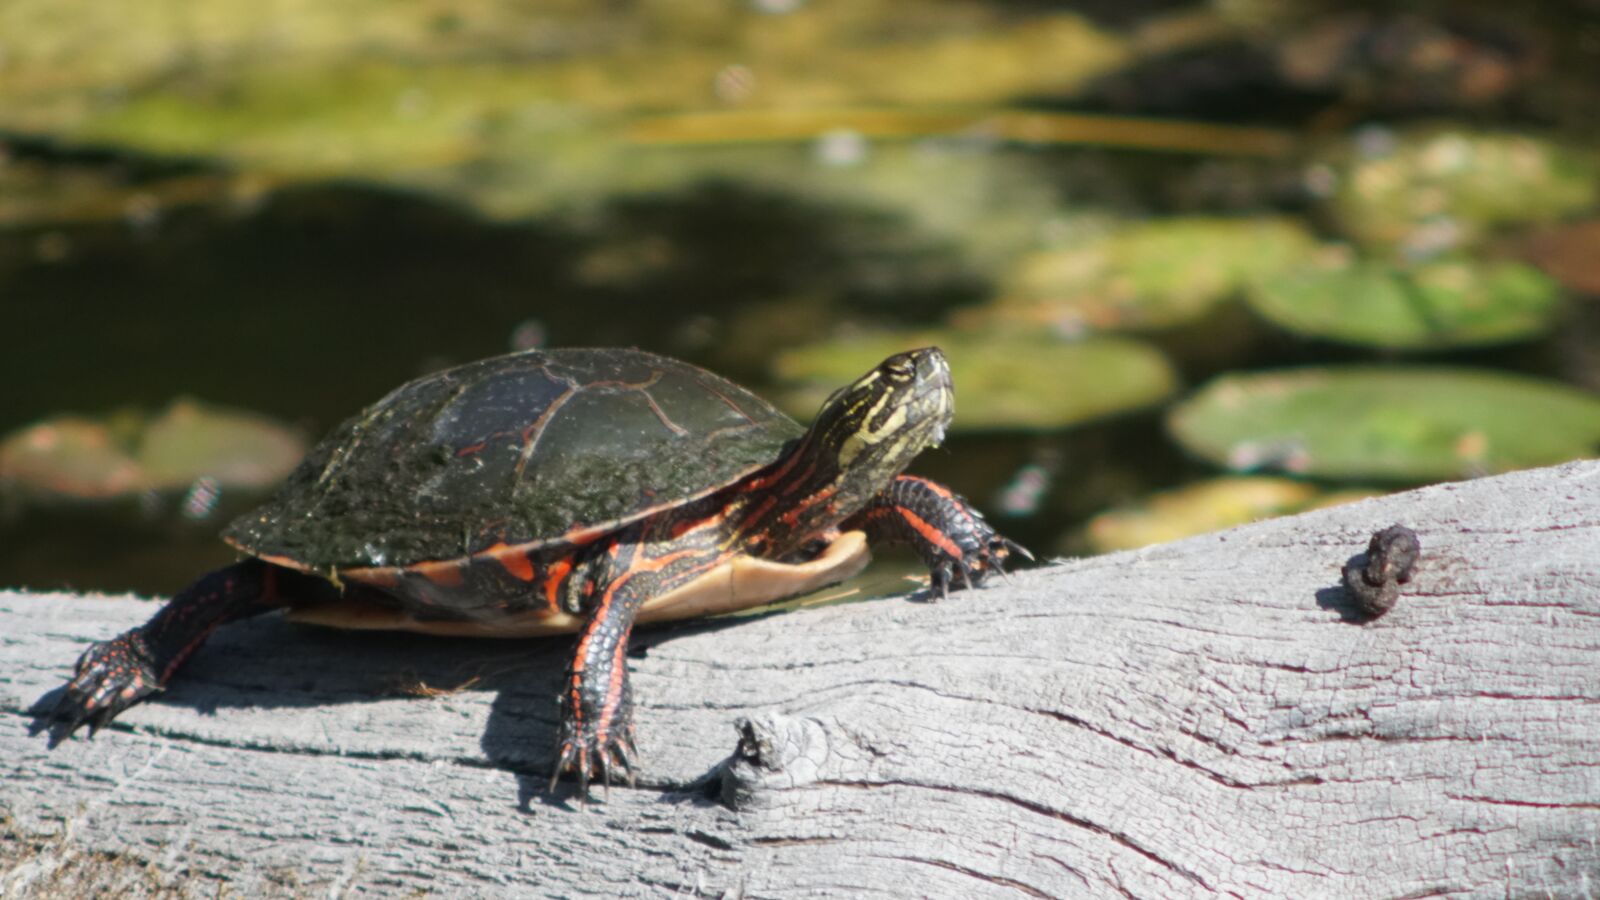 Sony a6300 sample photo. Turtle, log, lily pads photography